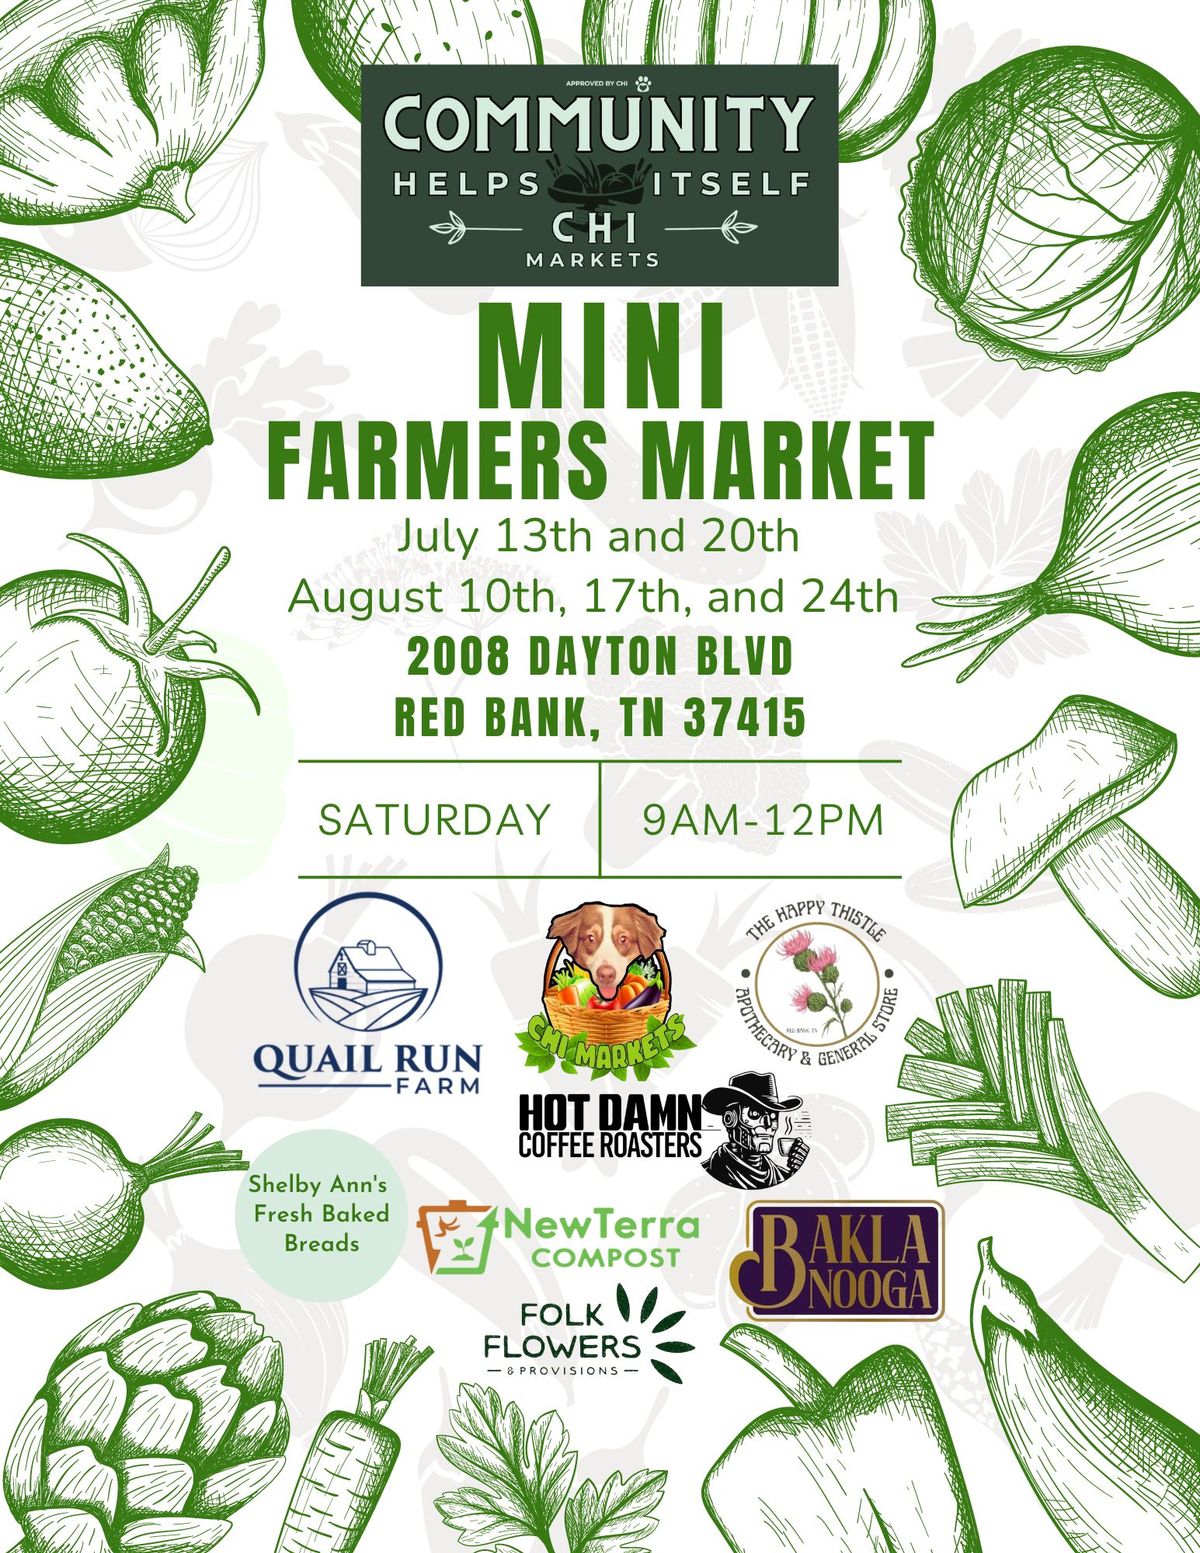 Upcoming Red Bank Mini Farmers Markets